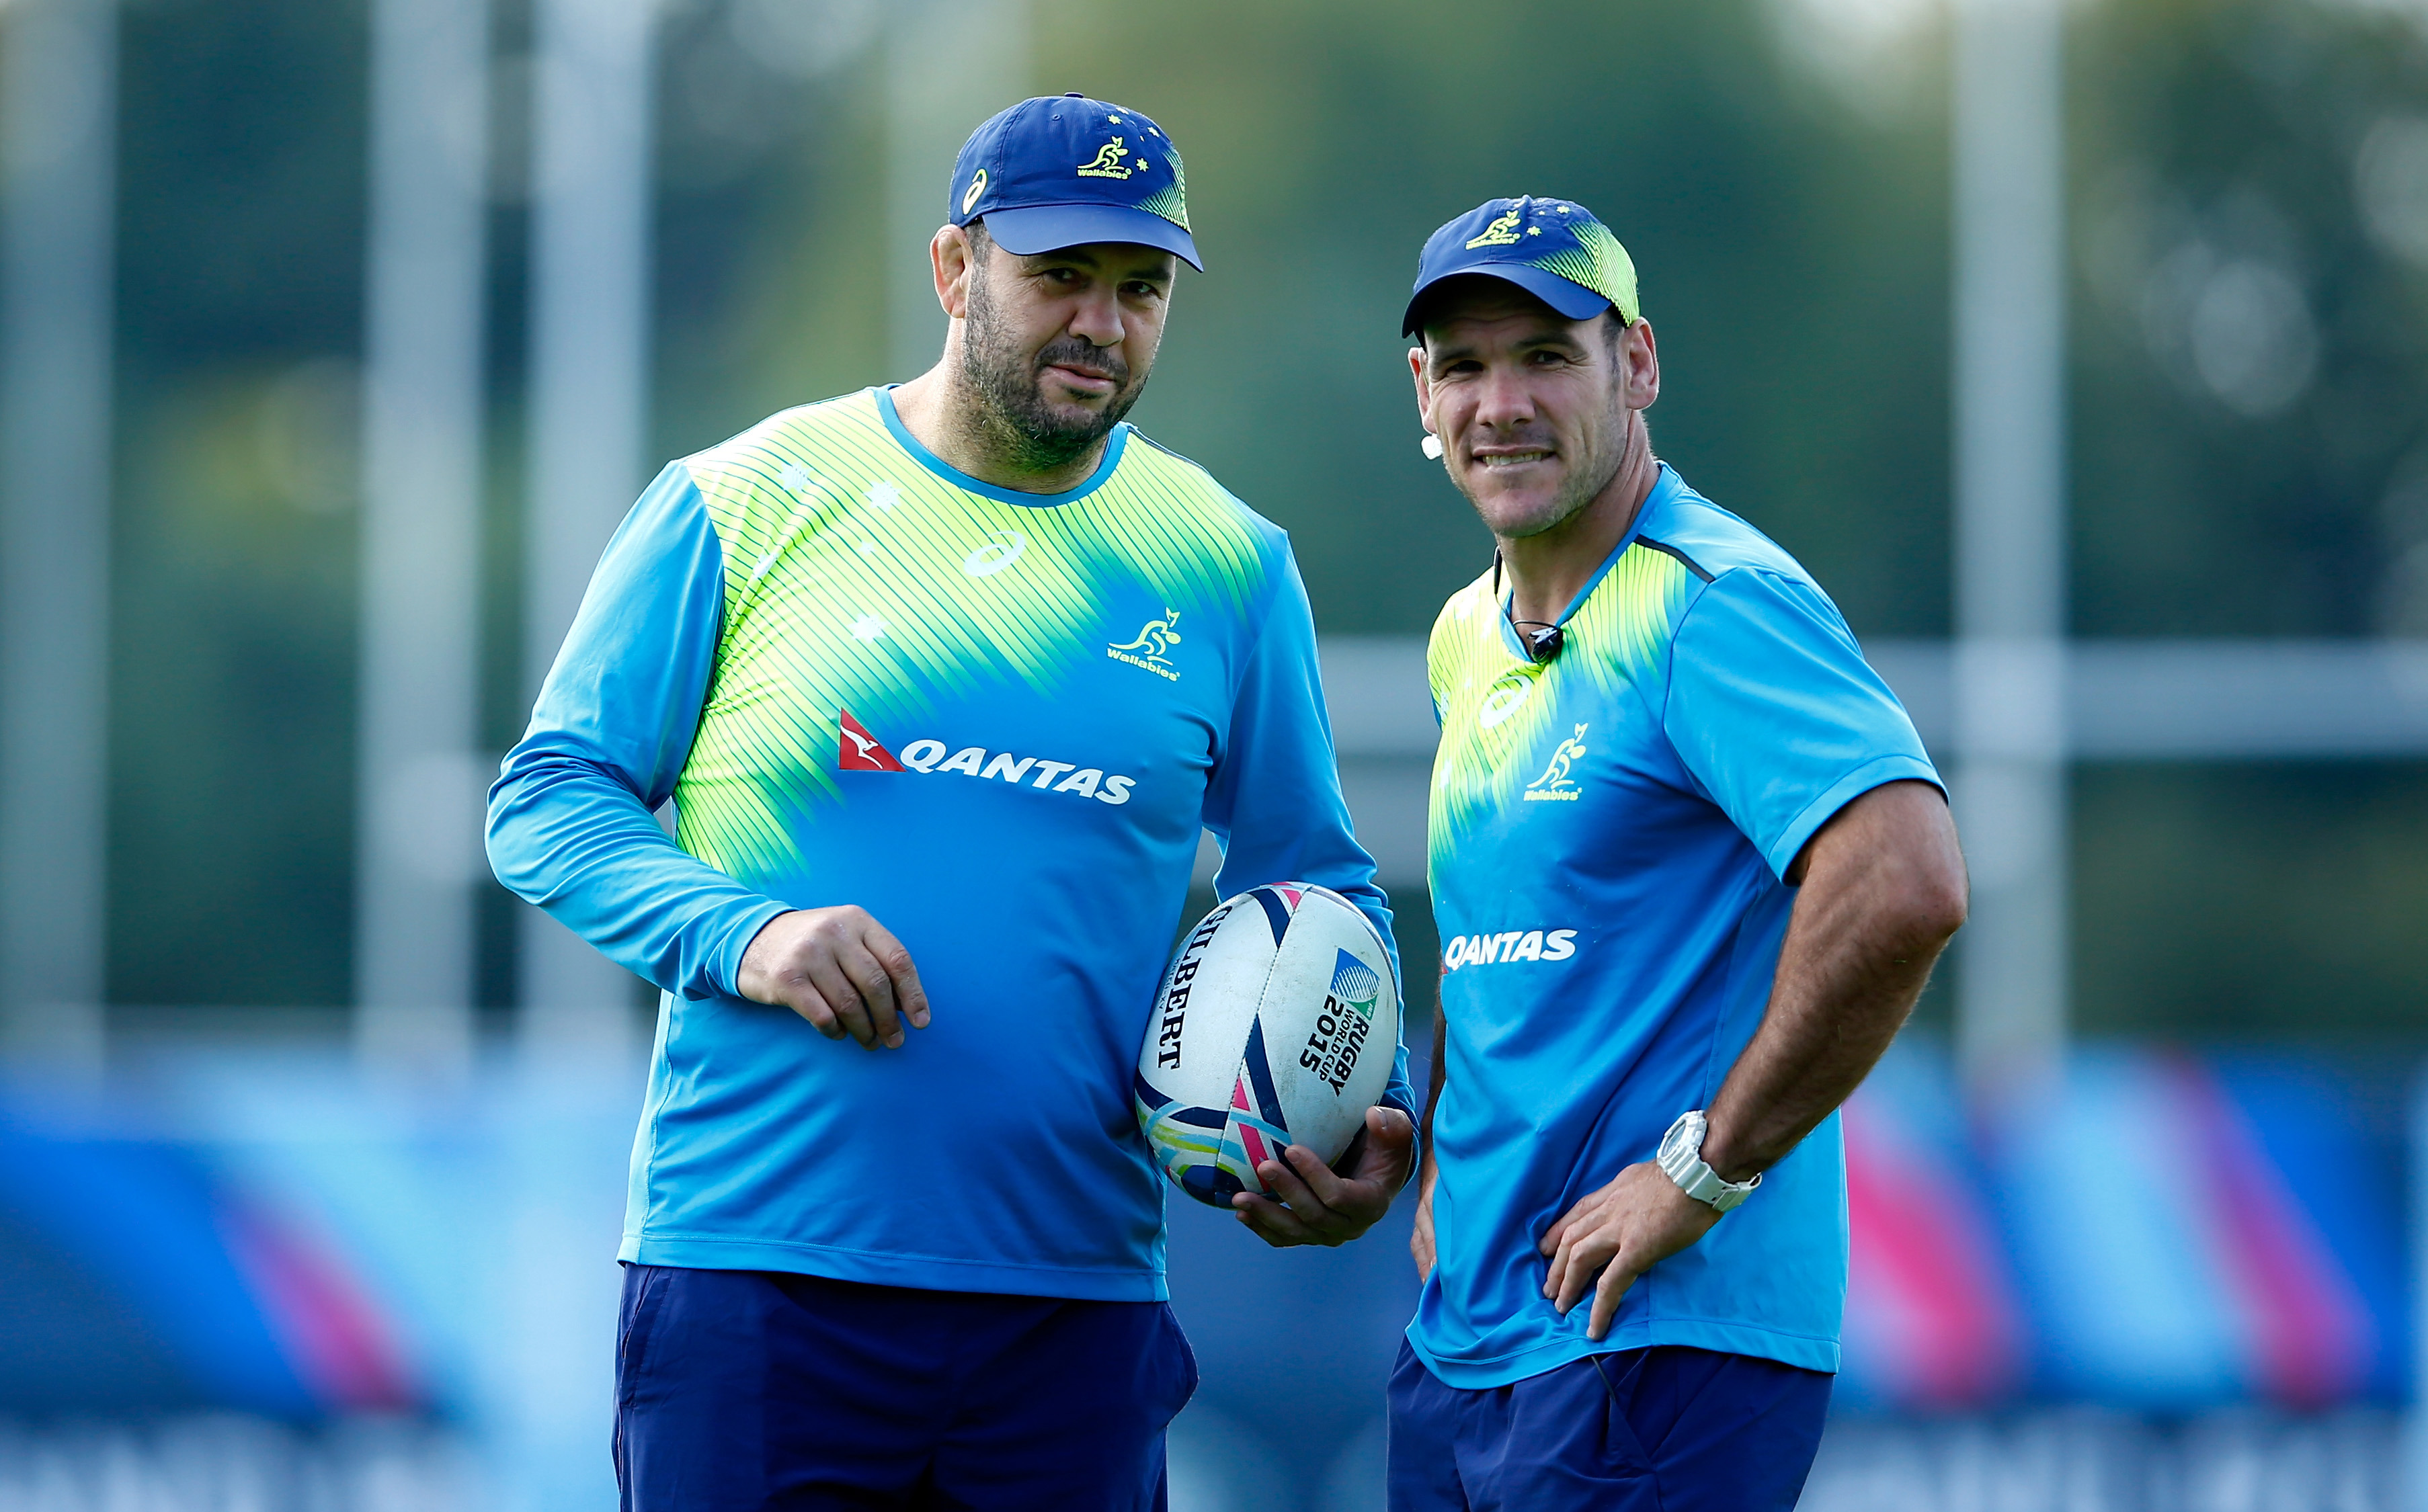 Michael Cheika talks with Nathan Grey during a training session in 2015.